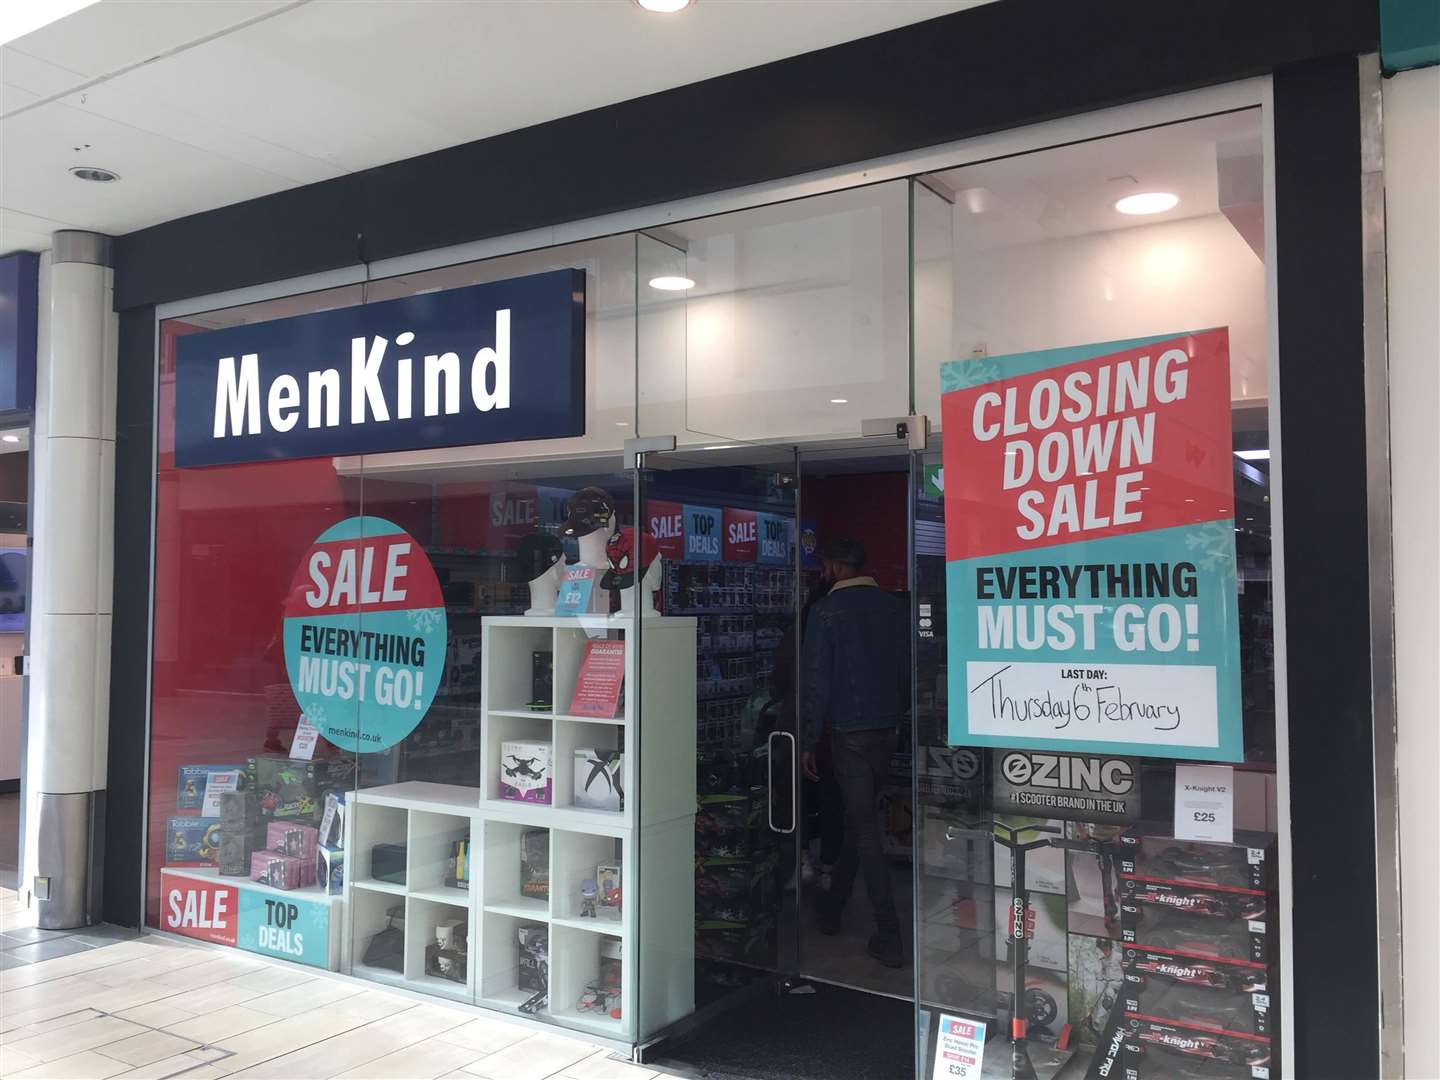 Menkind in County Square, Ashford, is closing down